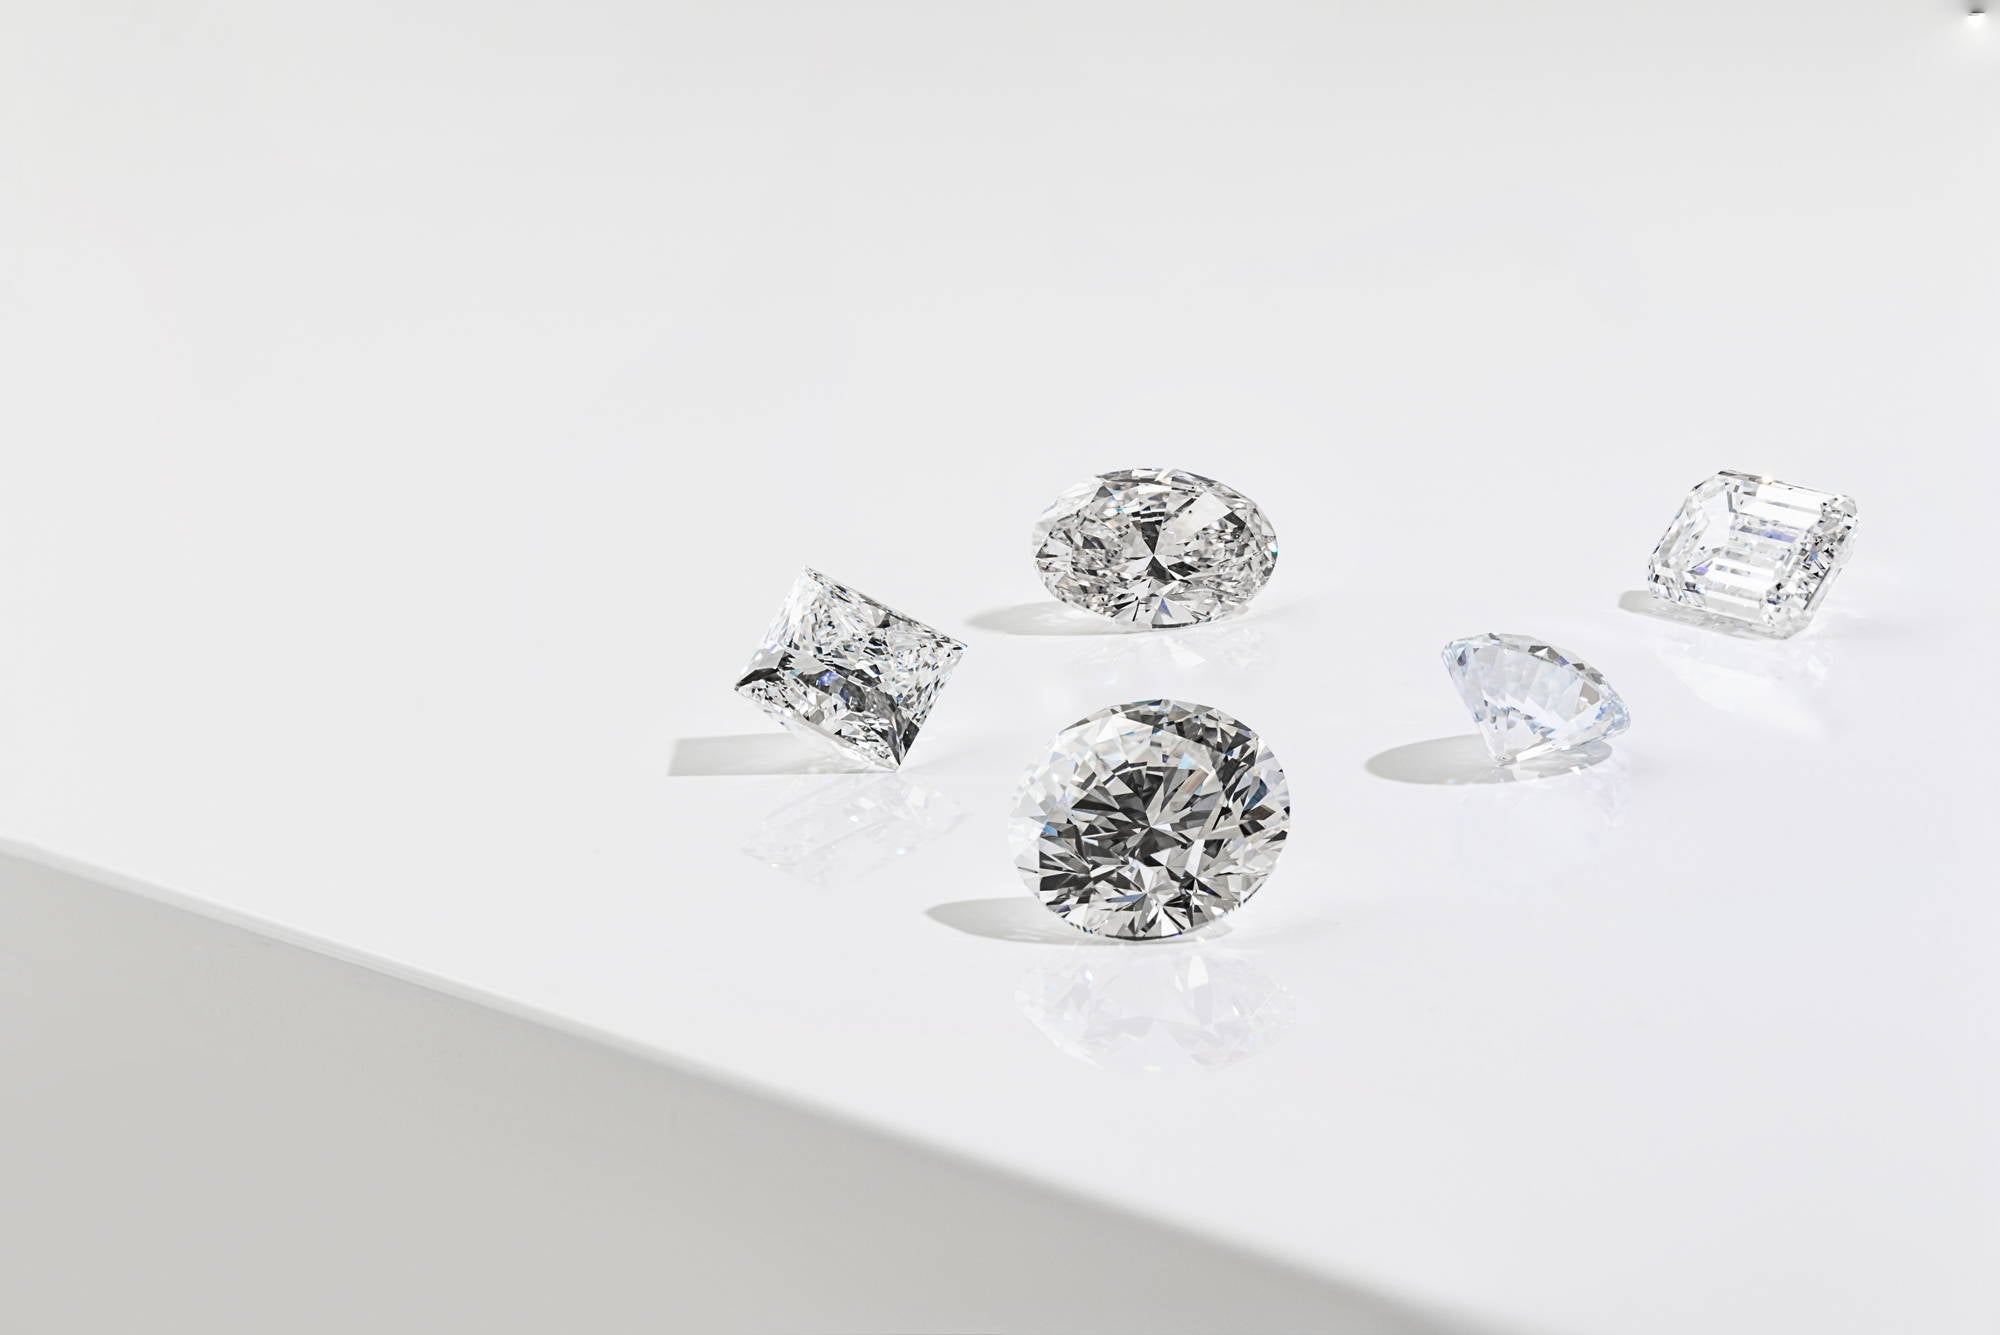 How to Choose a Diamond for Your Engagement Ring: The 4 C's